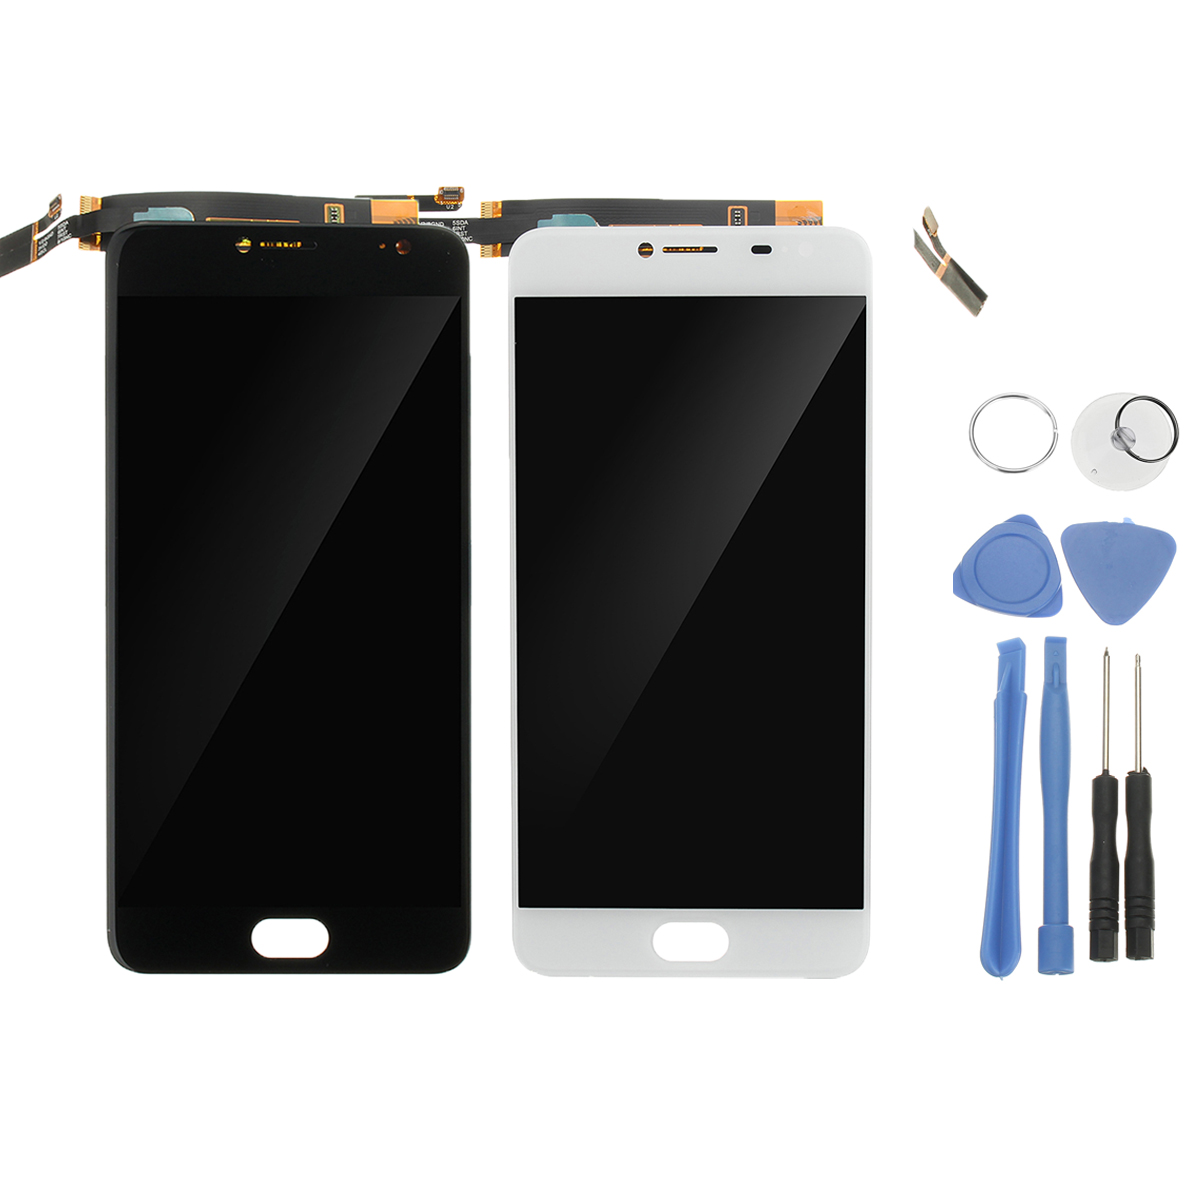 

LCD Display+Touch Screen Digitizer Assembly Replacement With Tools For UMI Z/UMI Z Pro